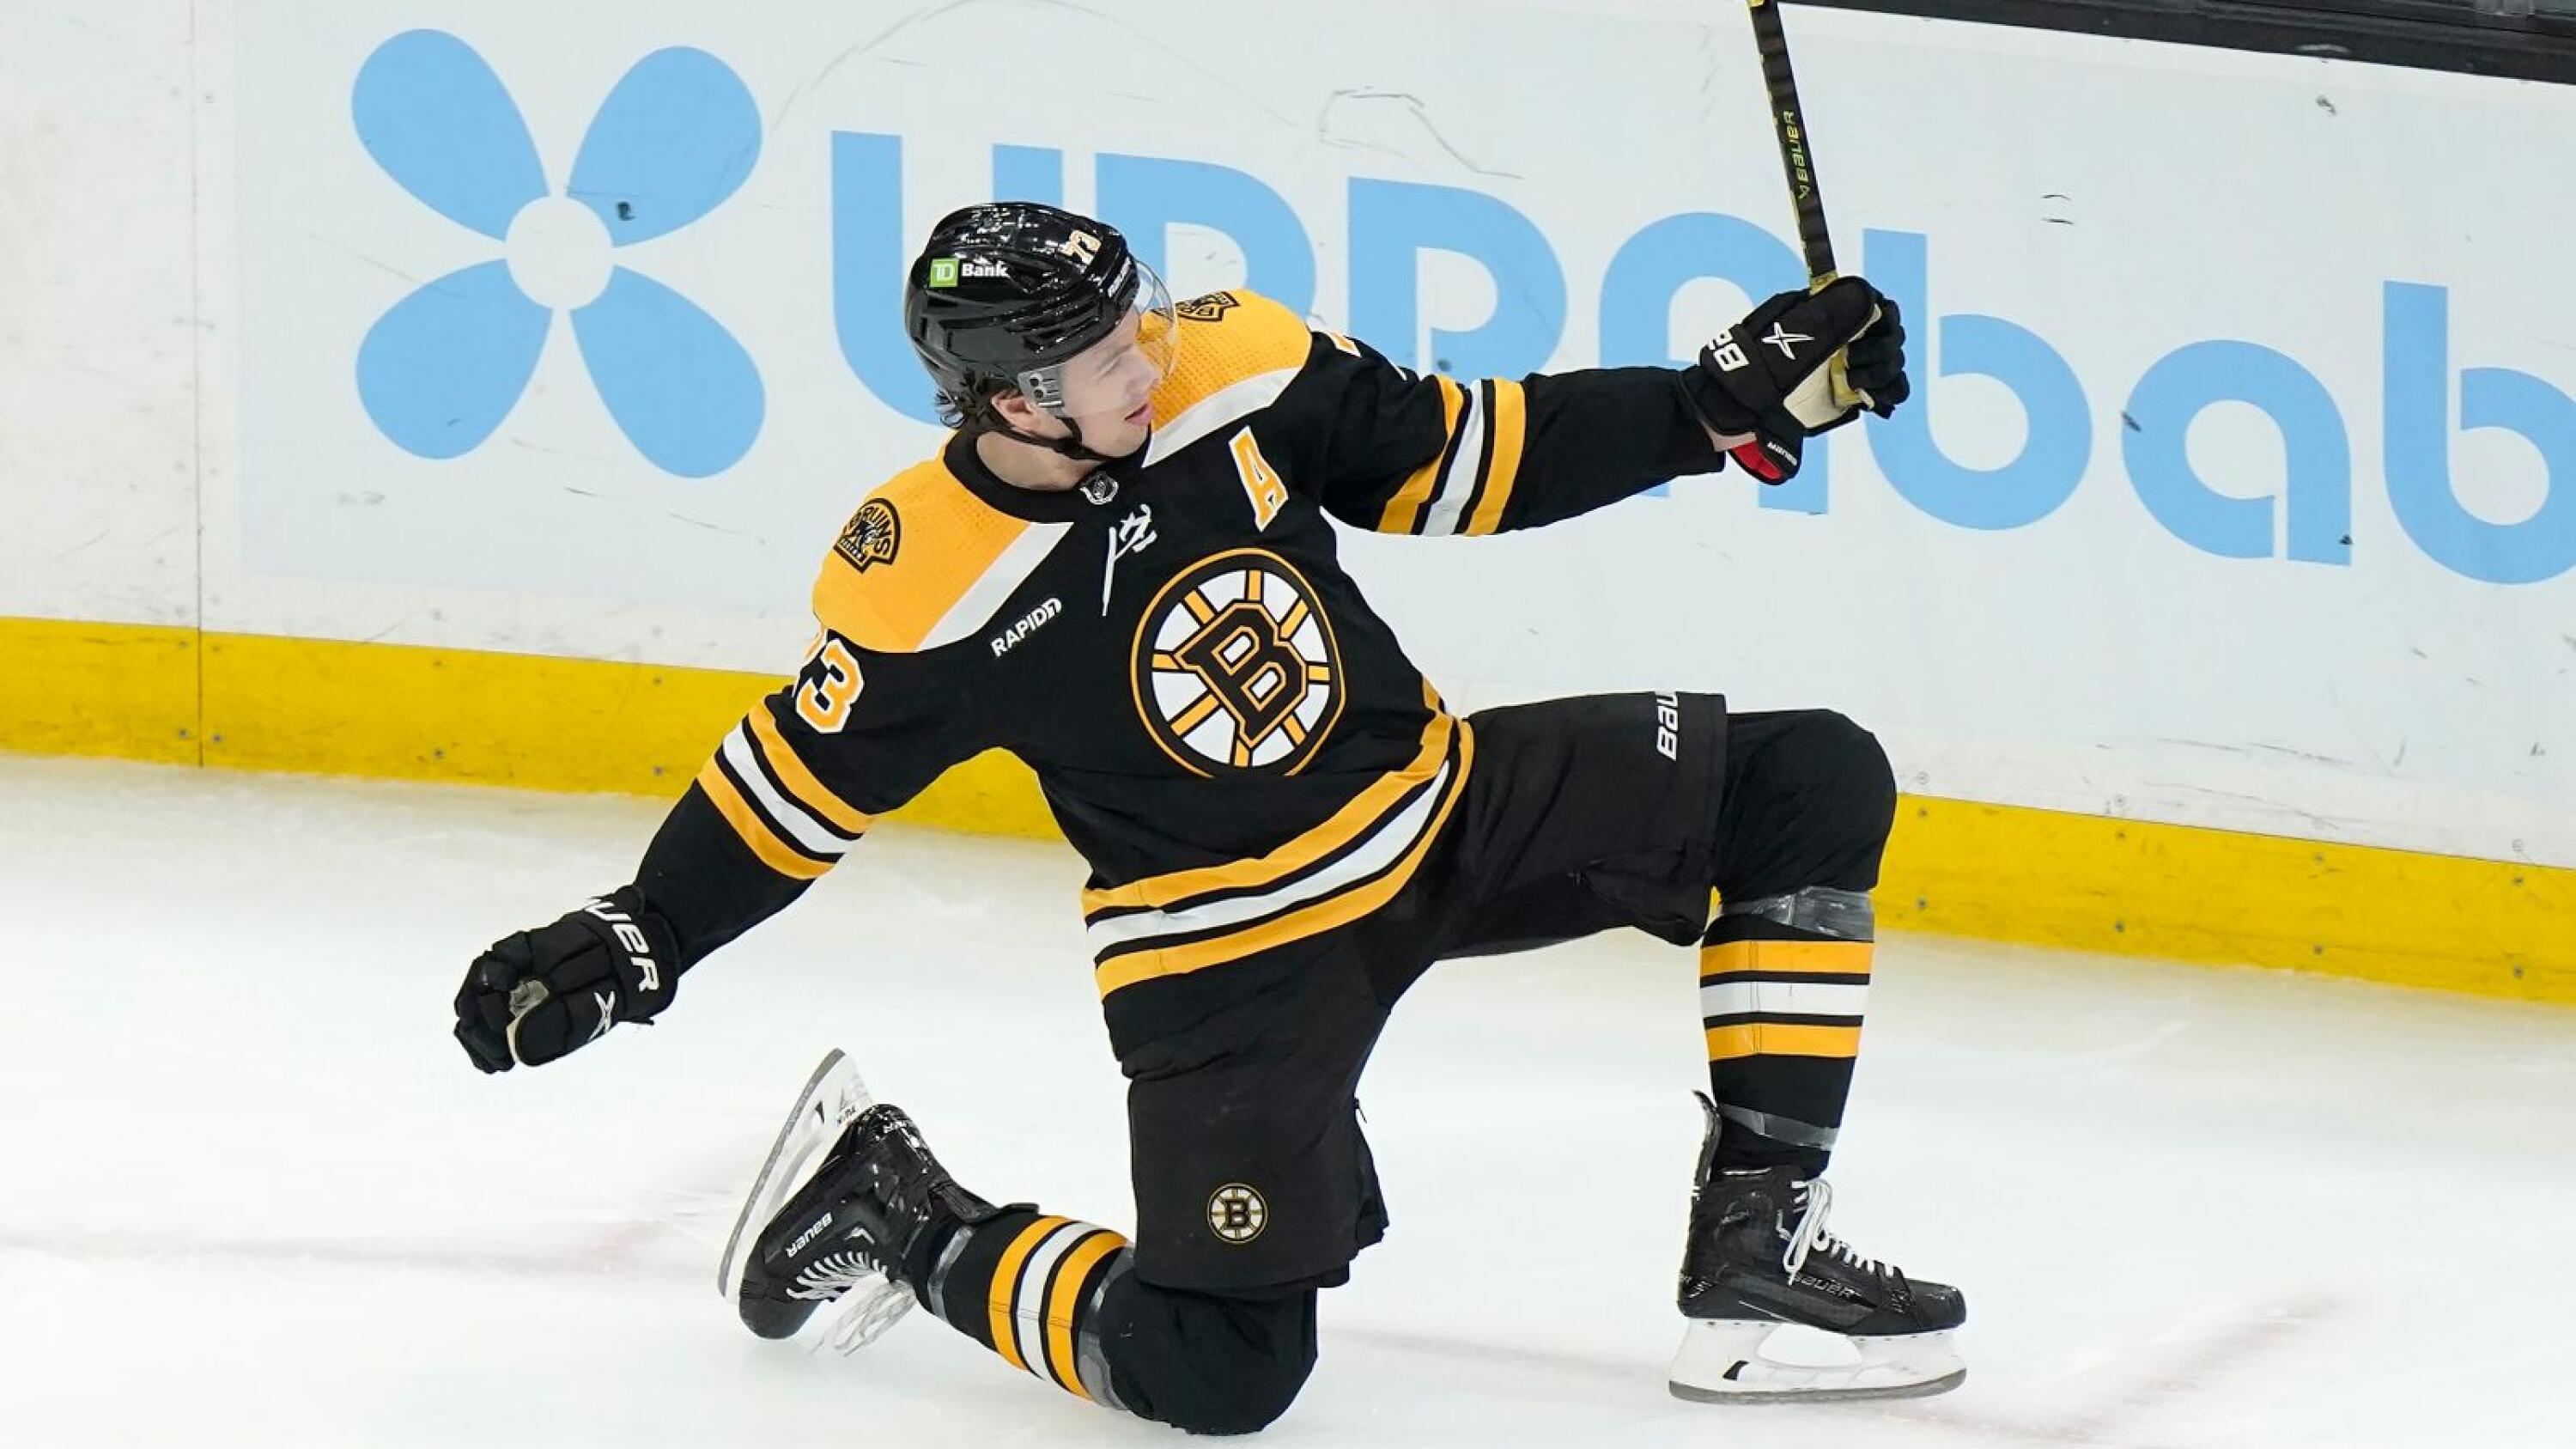 Bruins beat the winless Sharks 3-1 for their 3rd straight win to